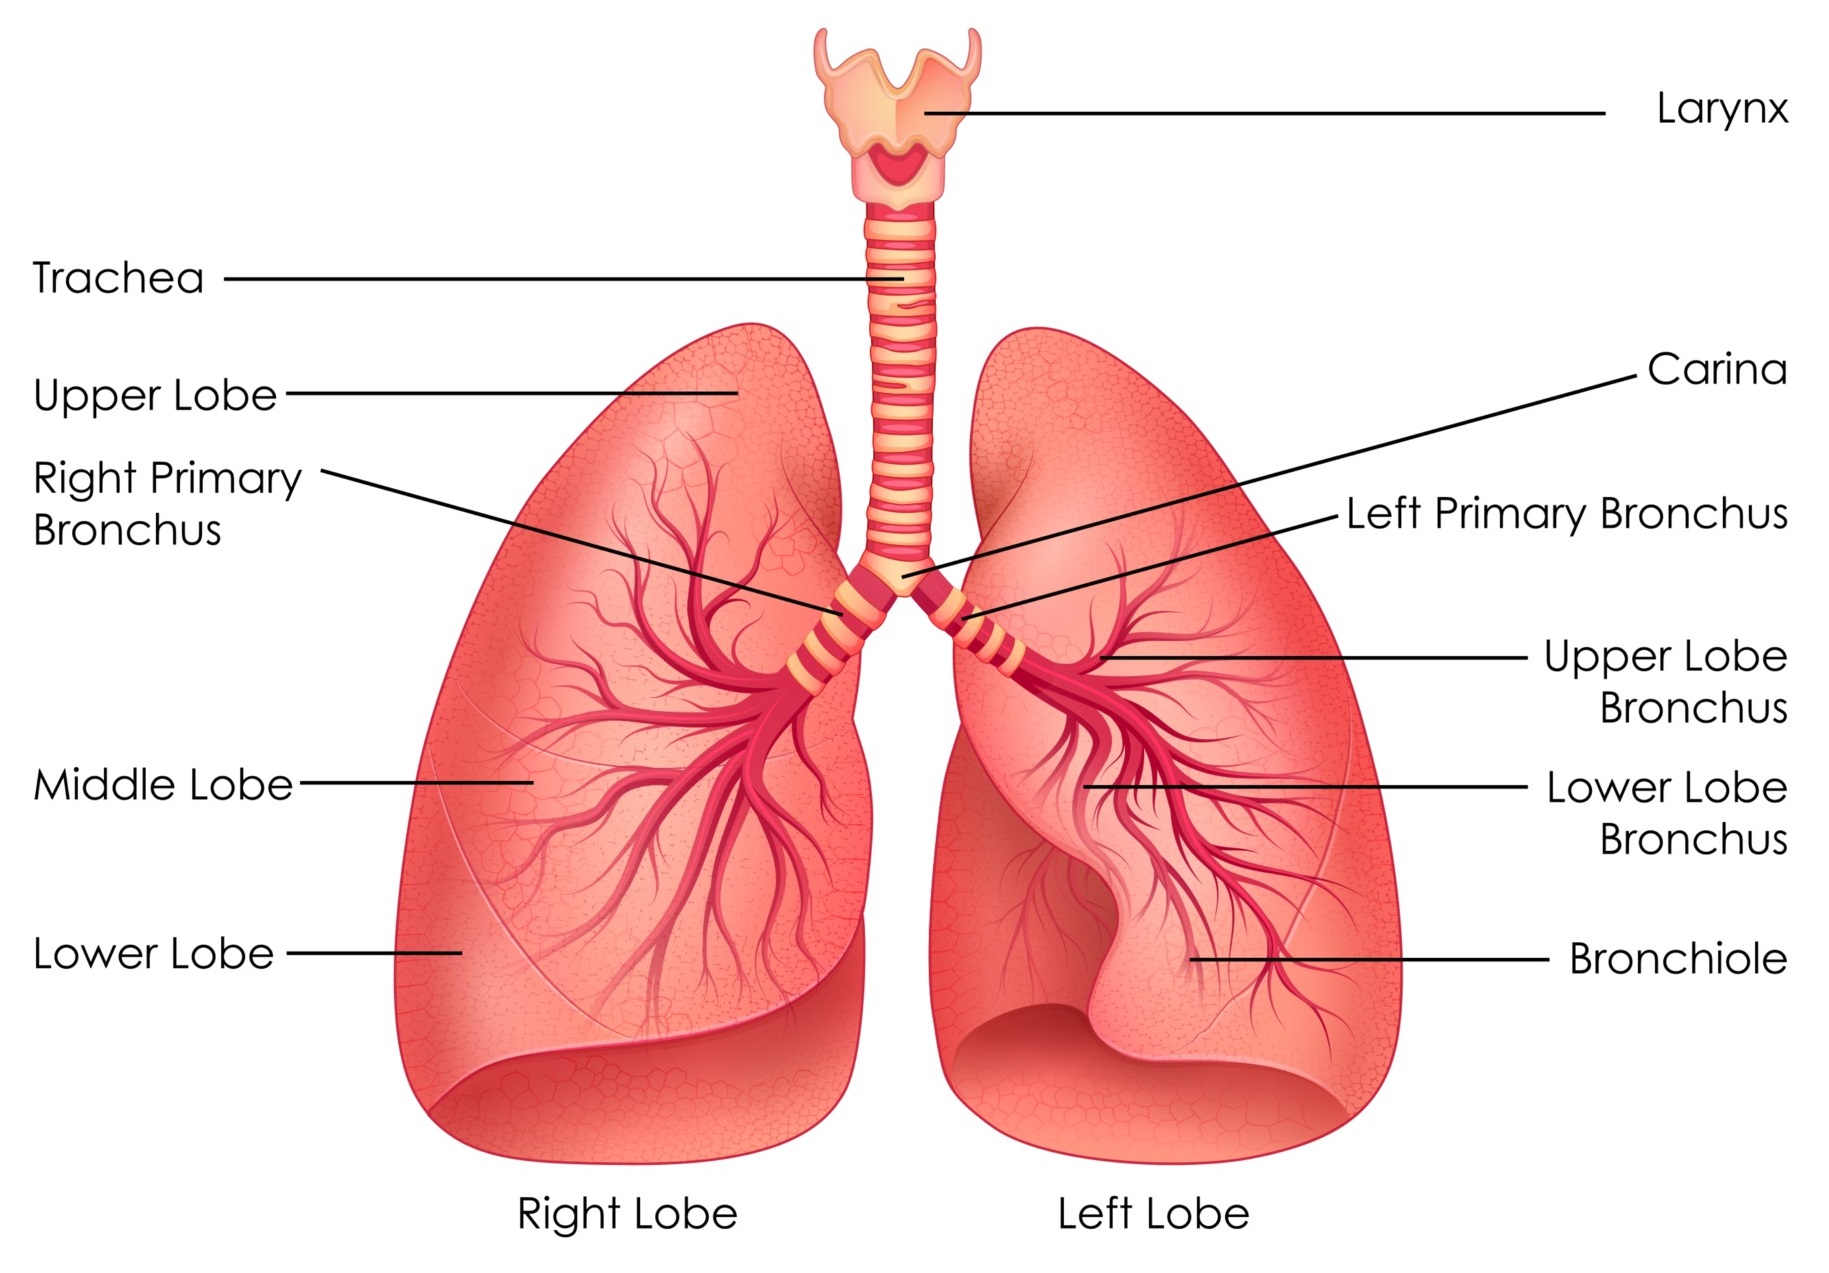 WBBSE Notes For Class 6 General Science And Environment Chapter 8 The Human Body Human Lung